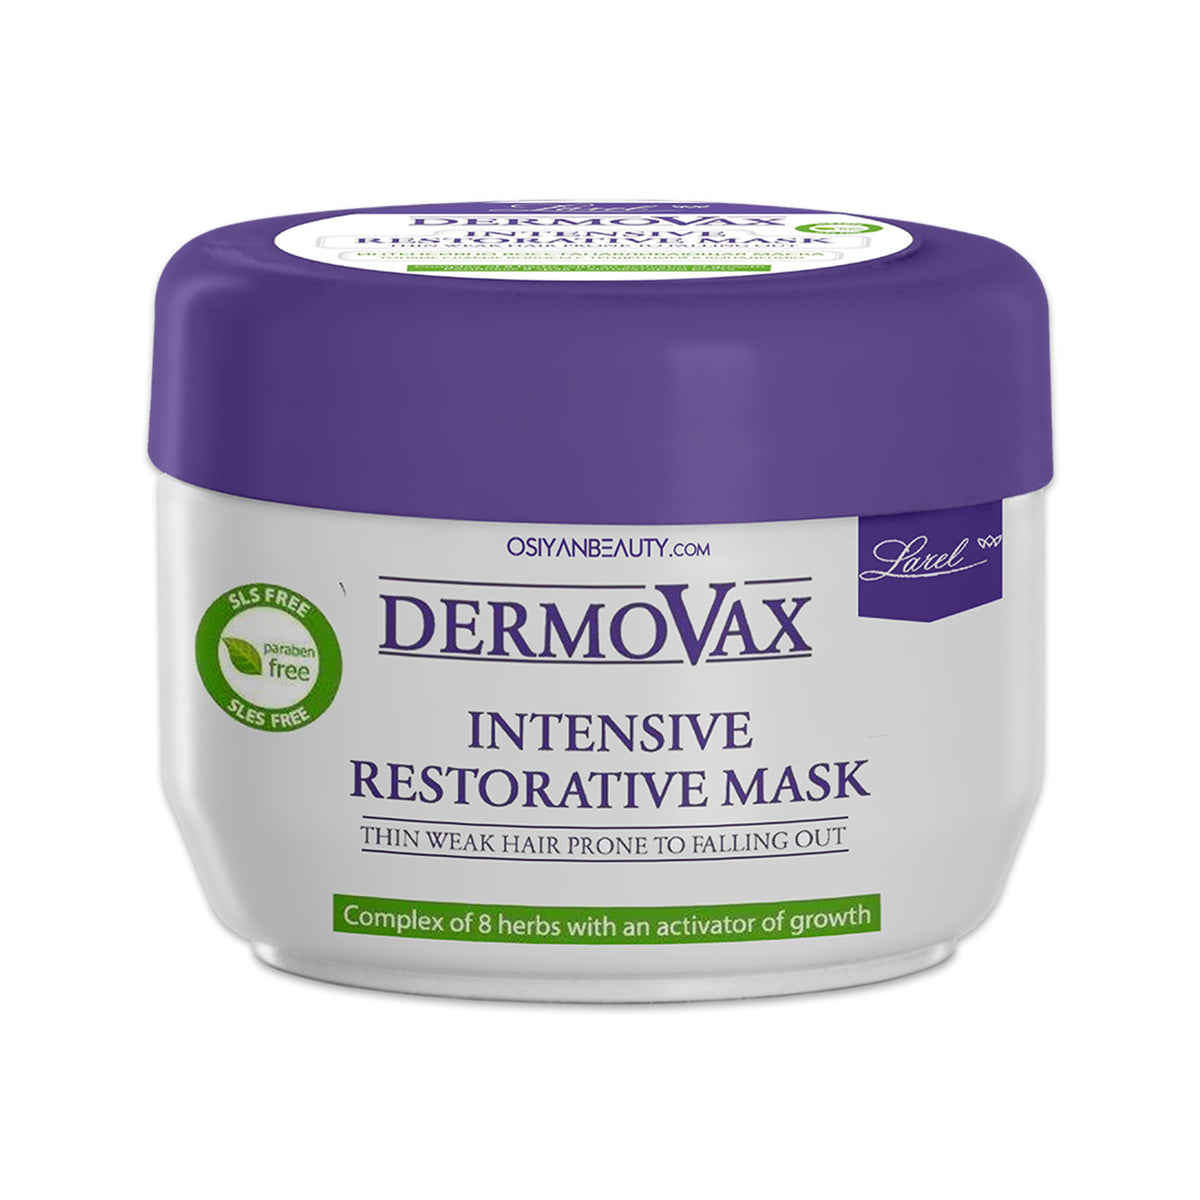 Dermovax Intensive Restorative hair mask made for thin weak hair prone to falling out(made in Europe)